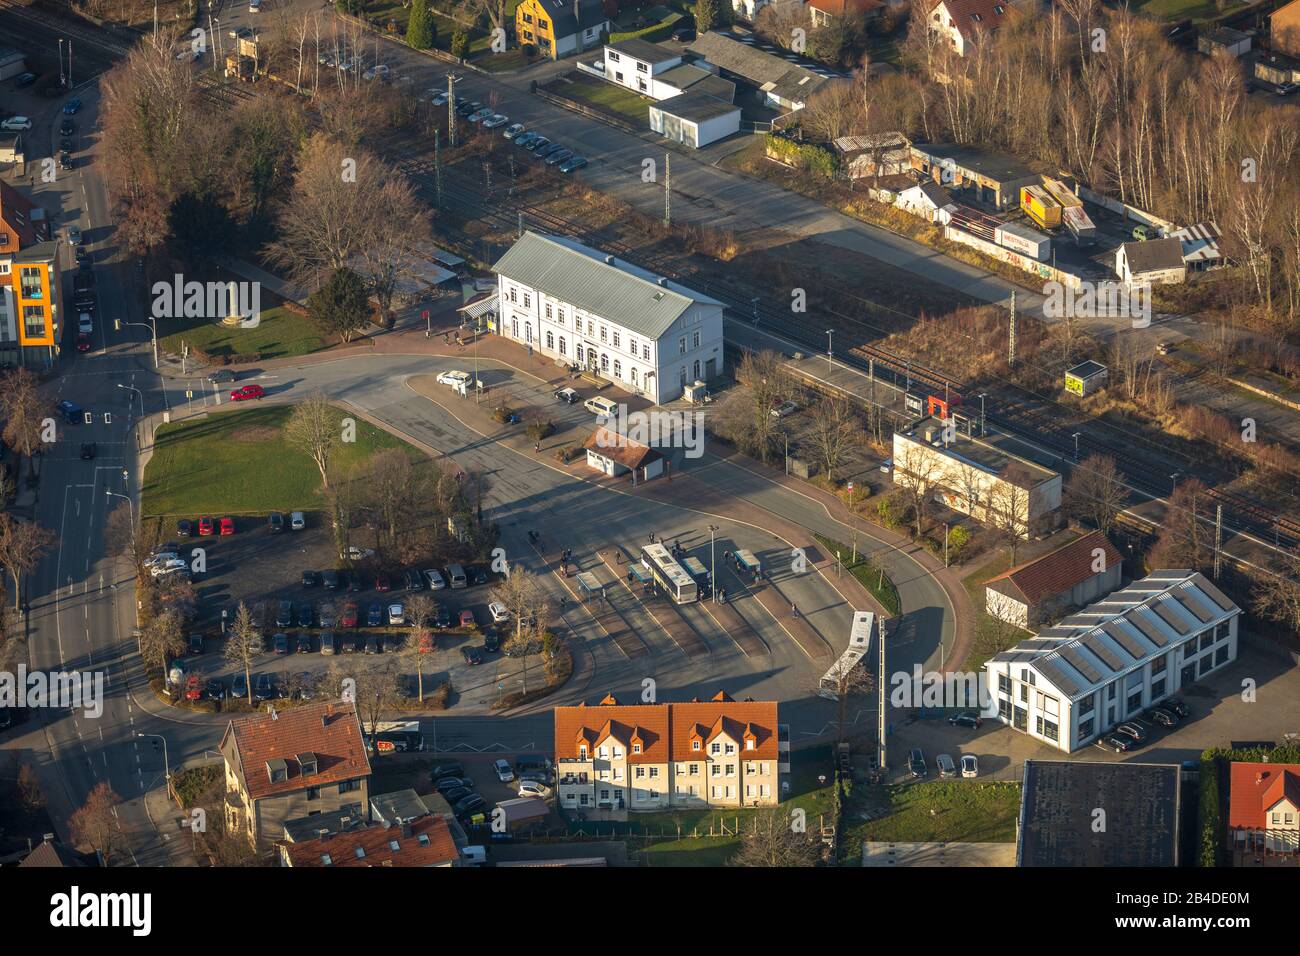 Aerial view, culture and event center at the station, Bahnhofstraße, Werl, Soester Börde, North Rhine-Westphalia, Germany Stock Photo